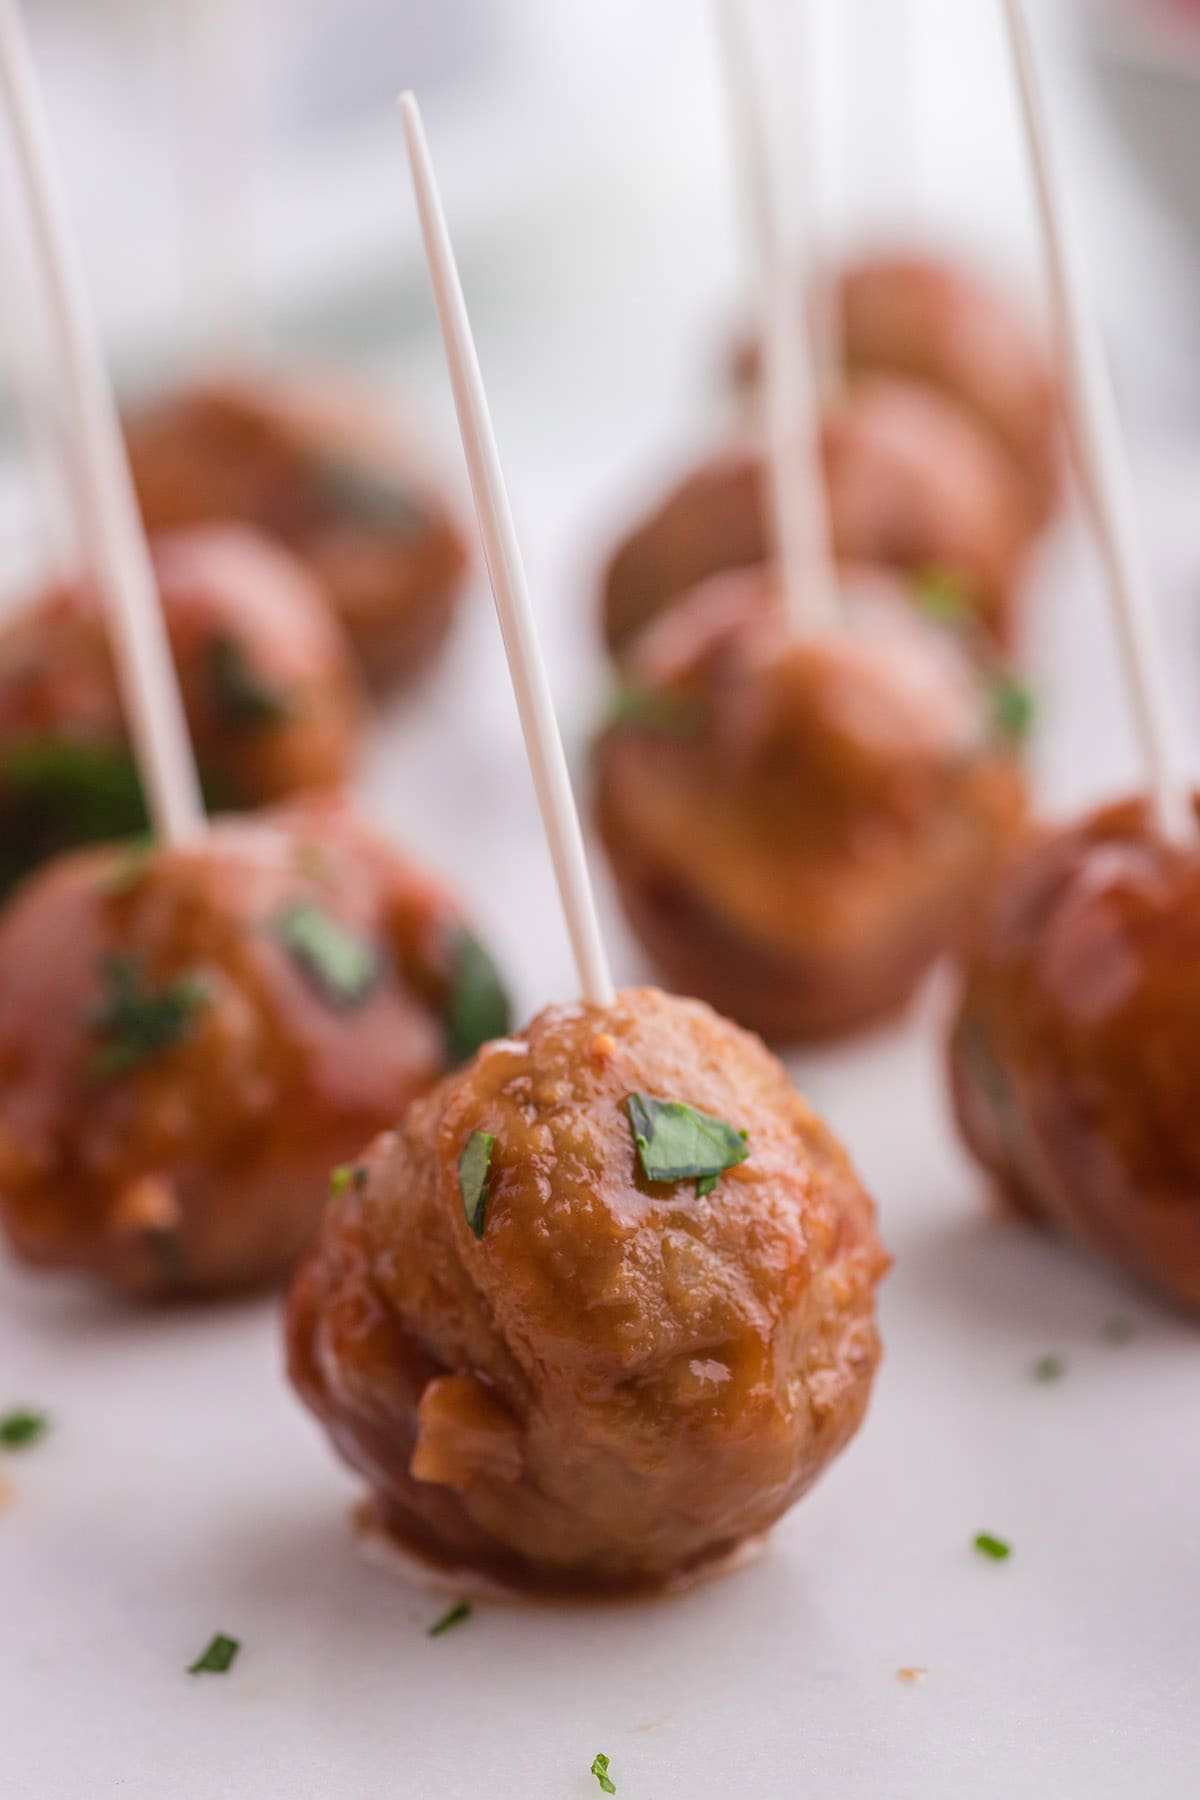 sticking toothpick into cranberry meatballs to serve as snack.